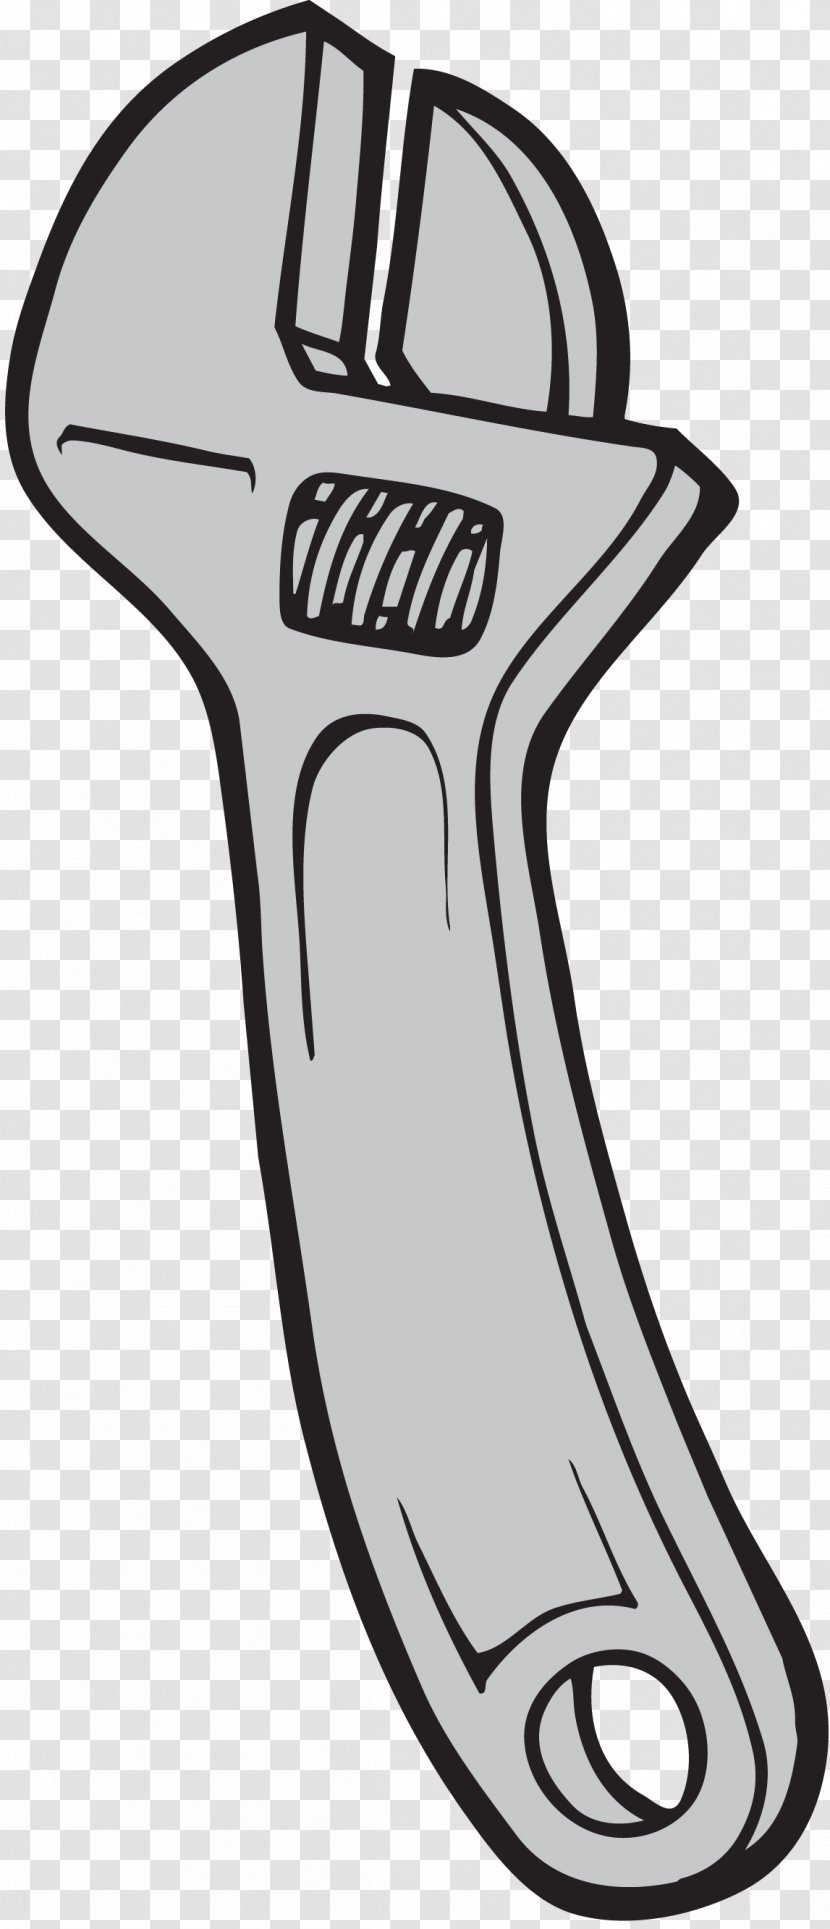 Clip Art Spanners Adjustable Spanner Drawing - Digital Image - Cleaning Tools Transparent PNG